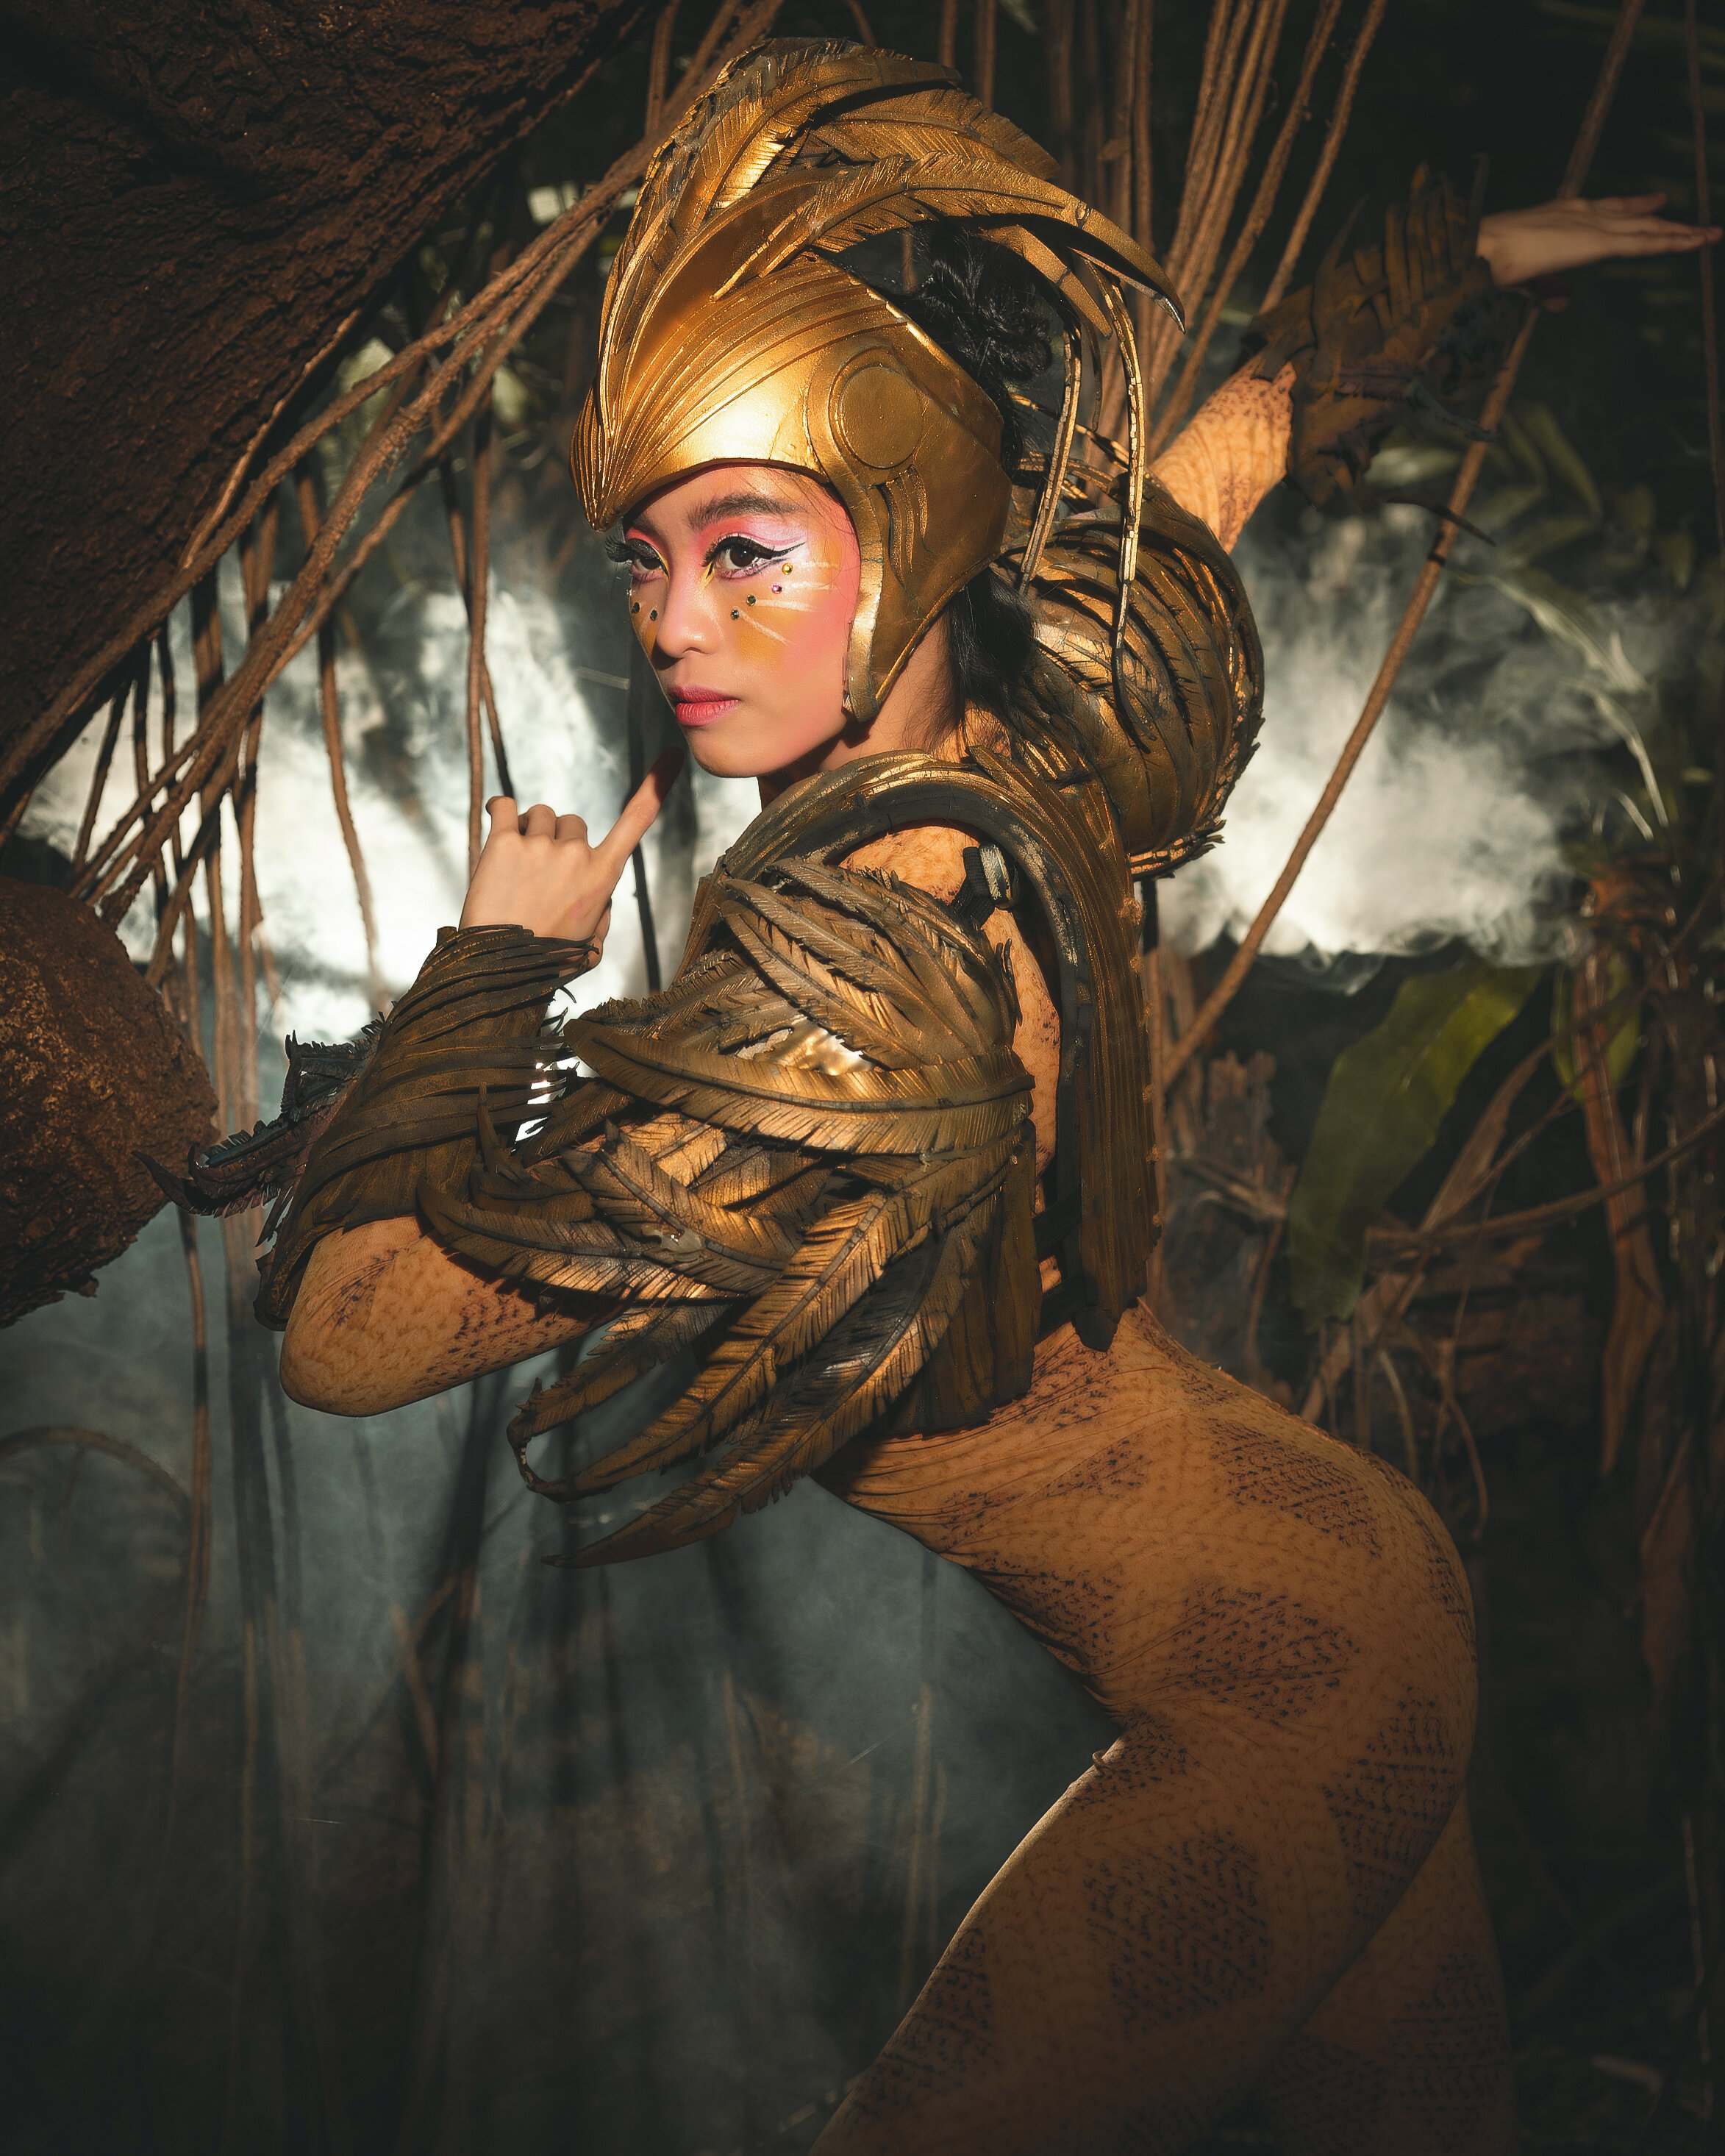  She may look vulnerable, but the Adarna (Joan Emery Sia) has the power to turn aggressors into stone. Photo courtesy of MarBi Photography and Project Art, Inc. 